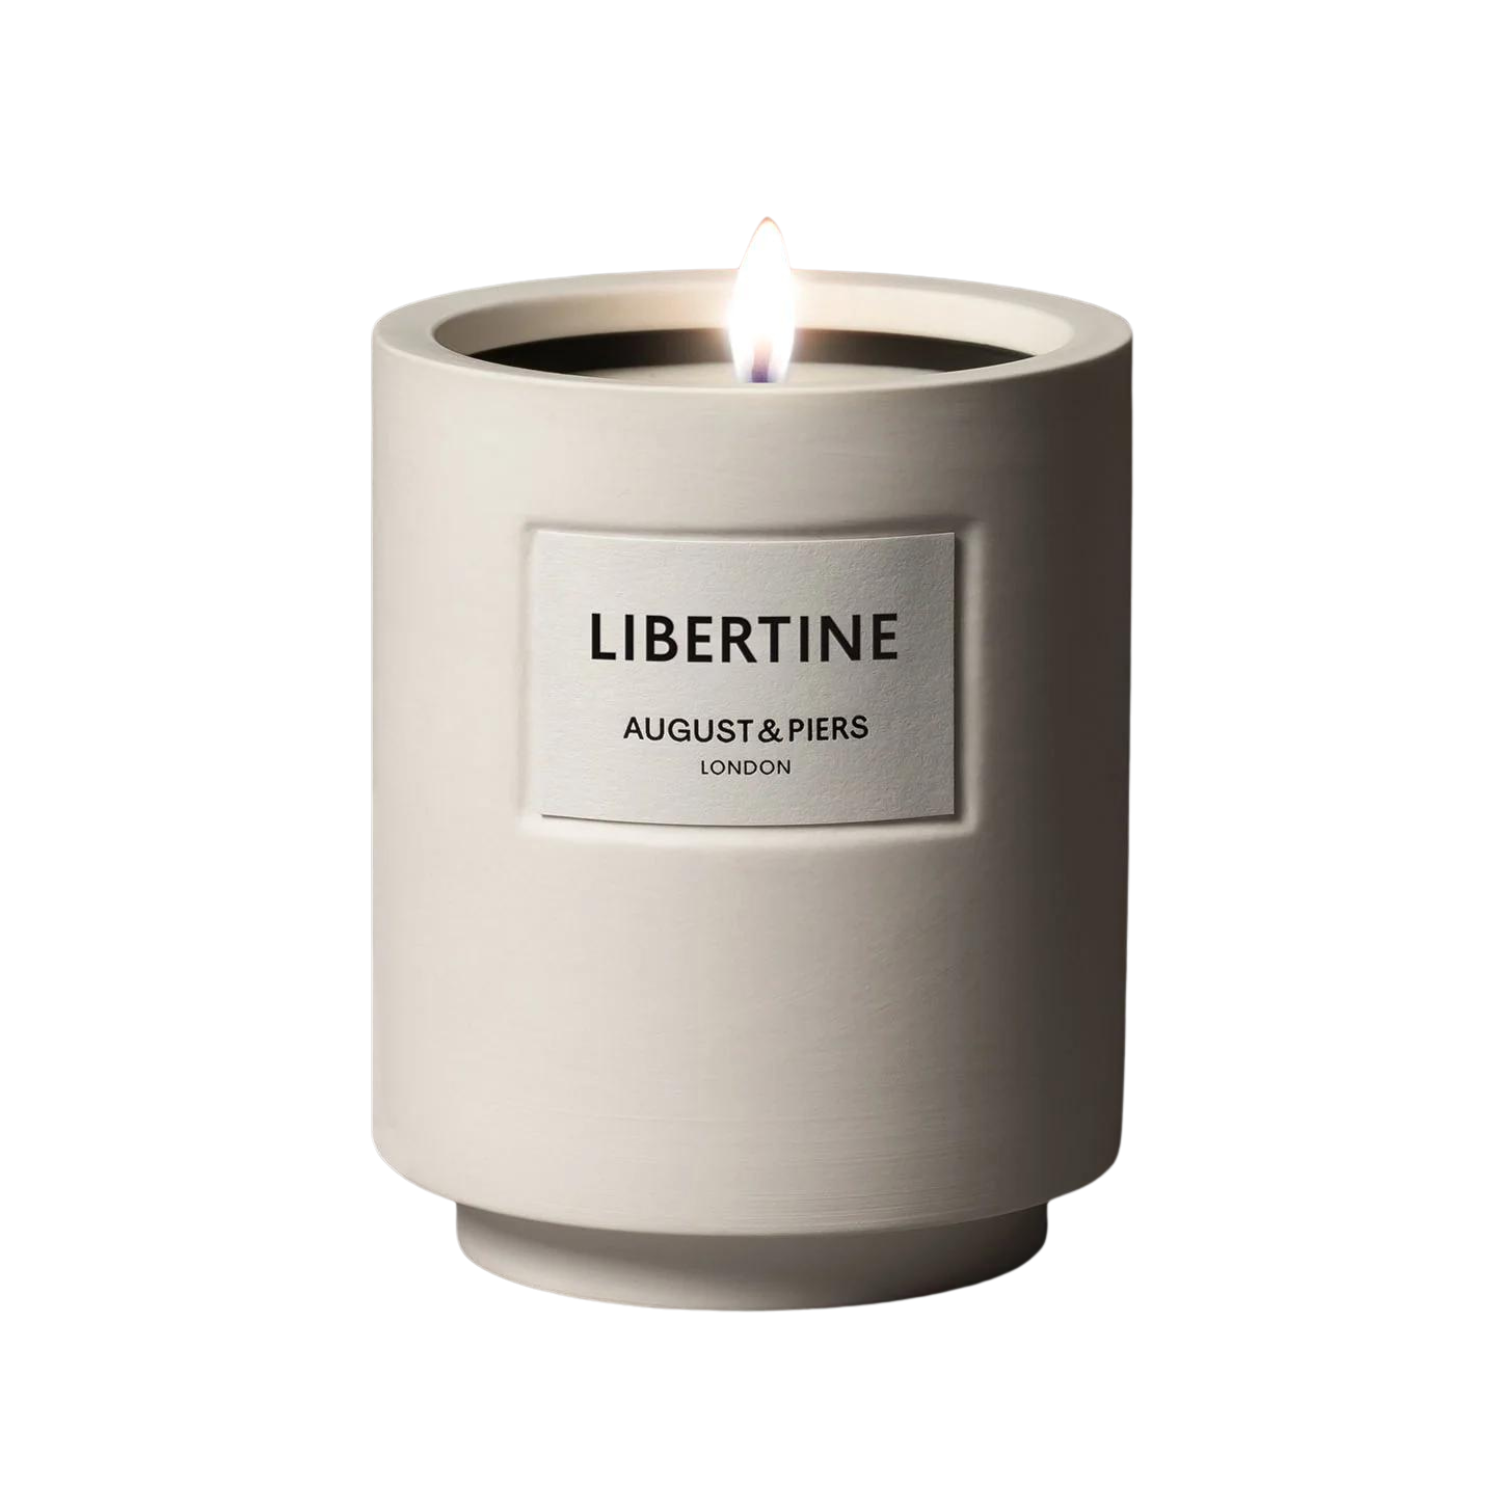 August & Piers Libertine Candle